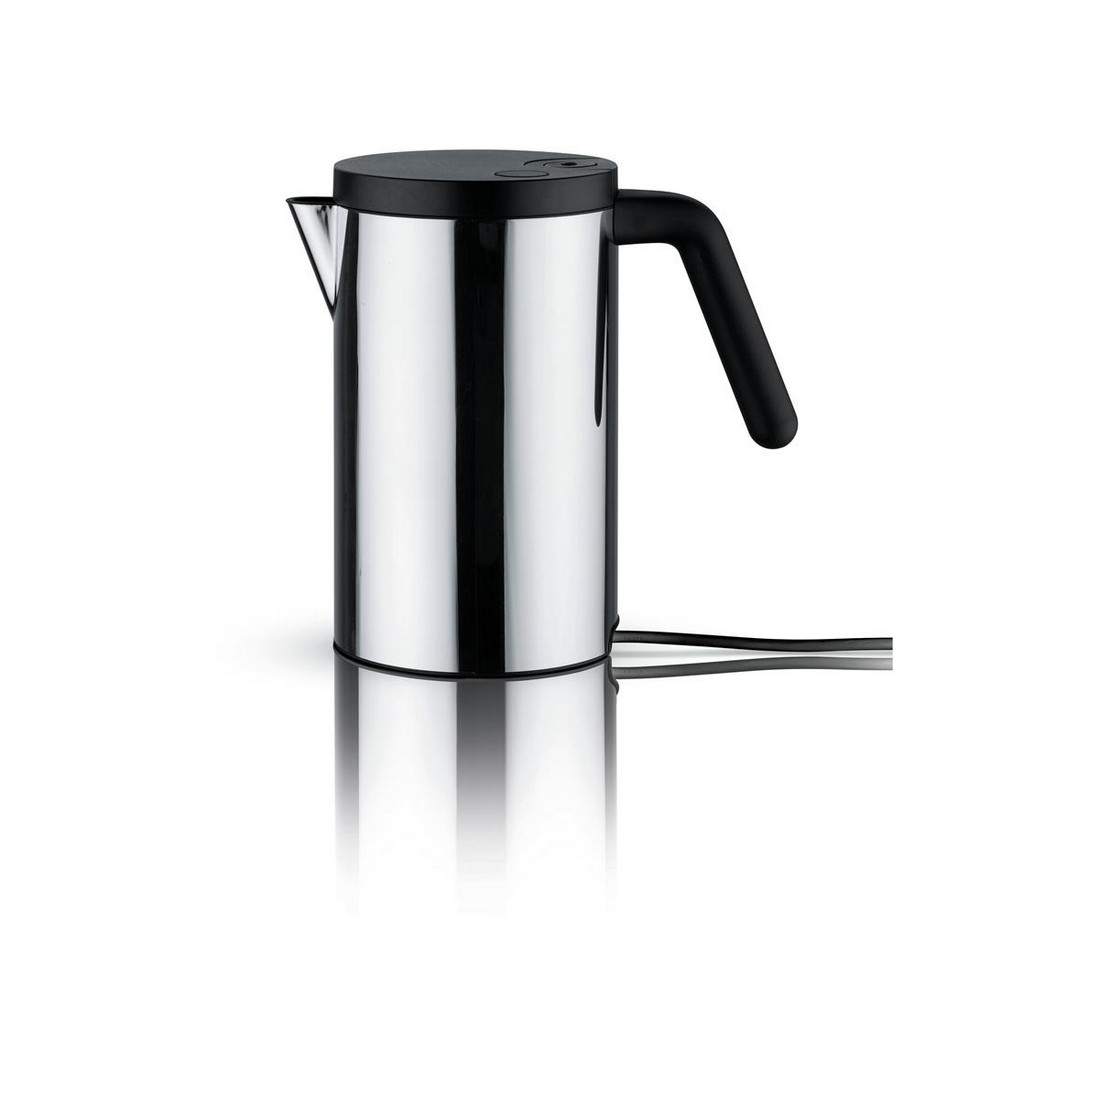 photo hotit electric kettle in black 18/10 stainless steel